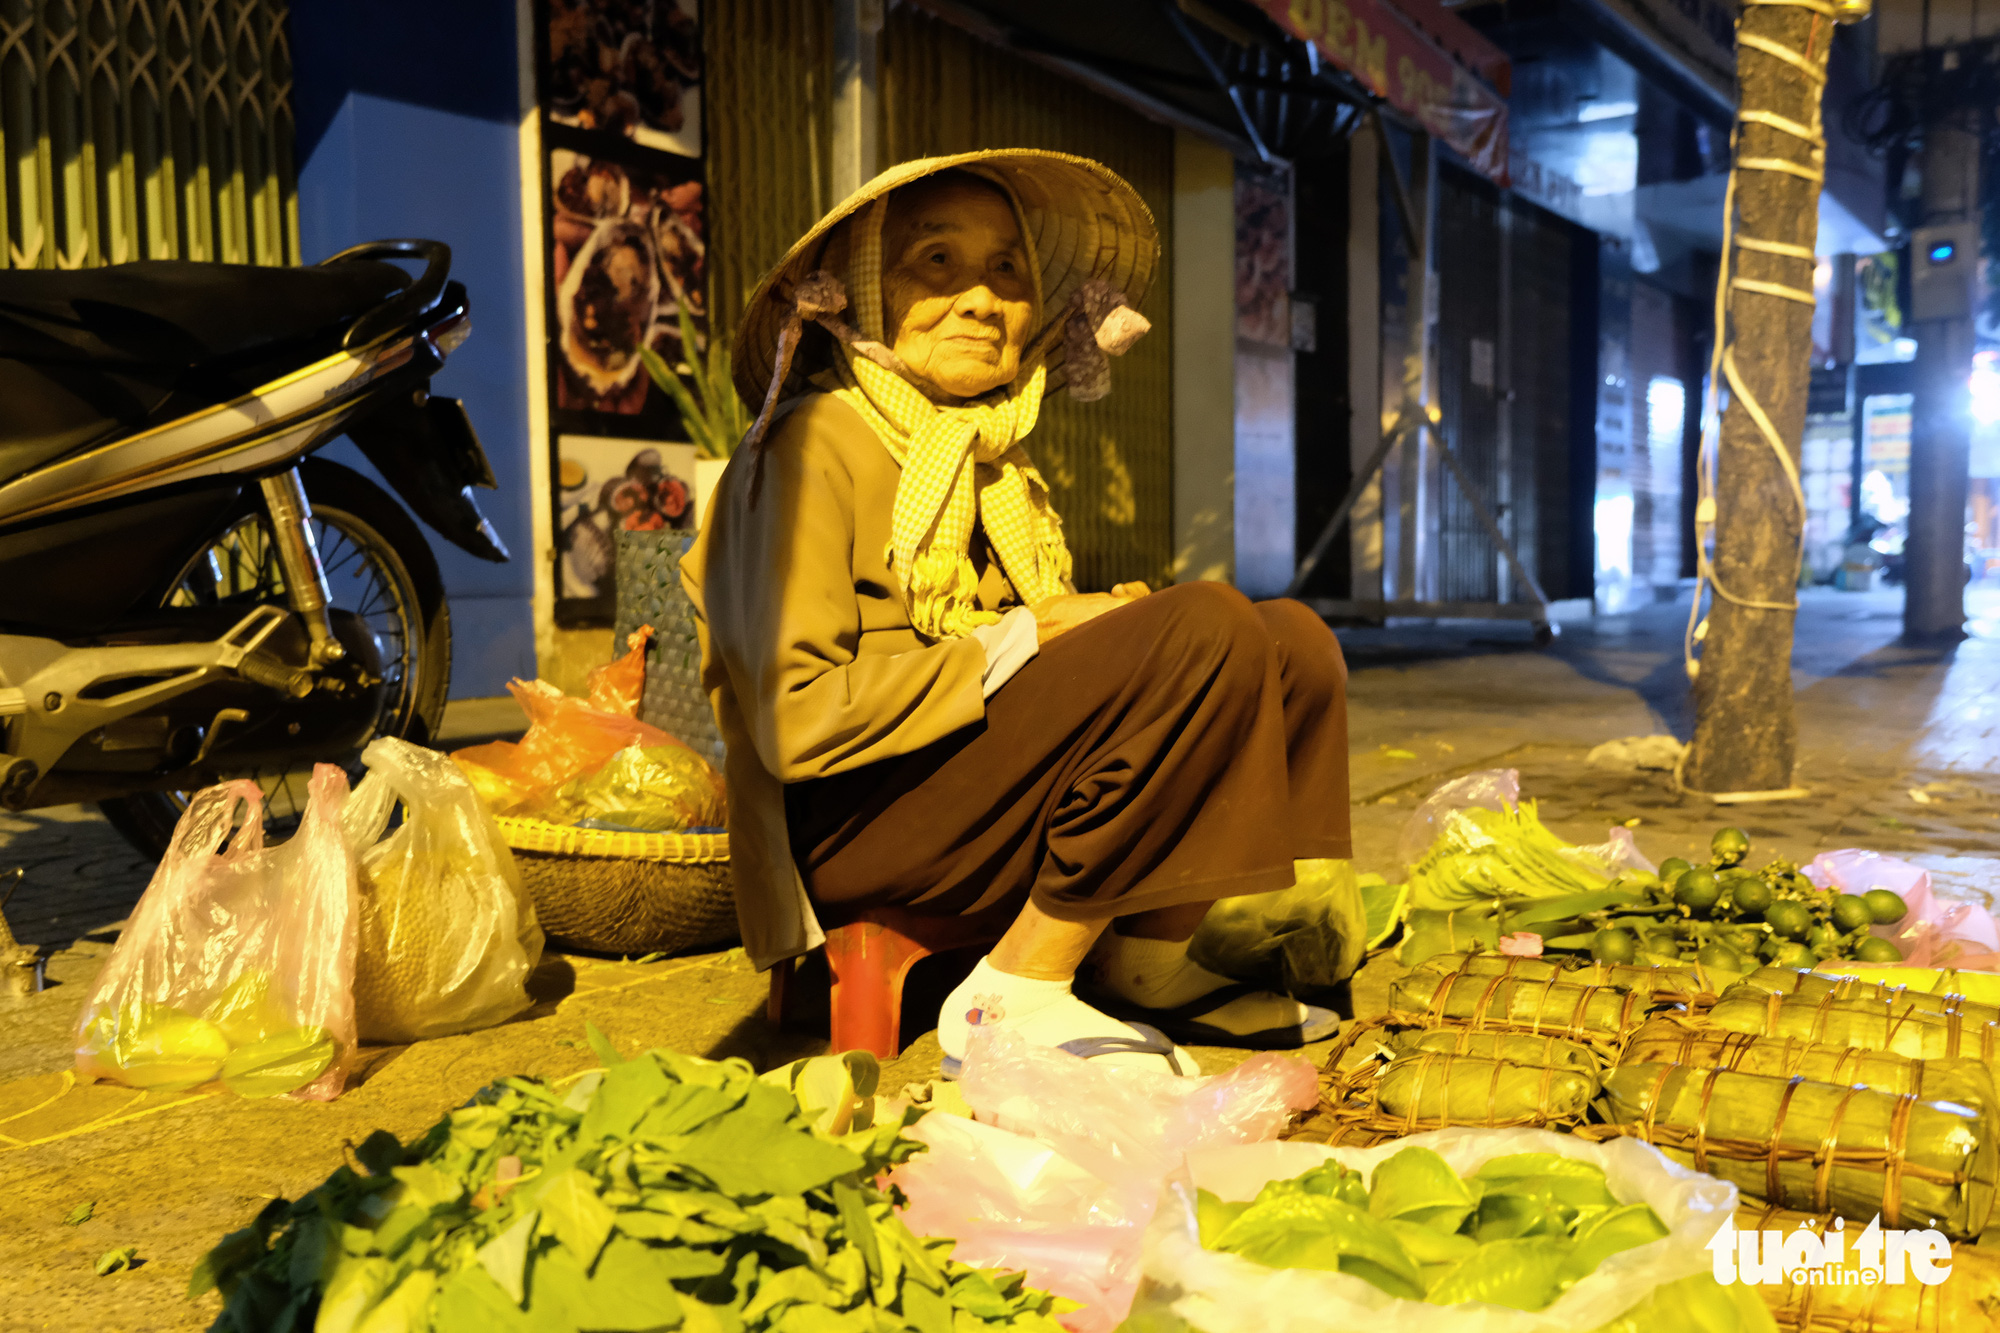 Life goes on: Saigon’s have-nots earn living amidst chilliest time of year